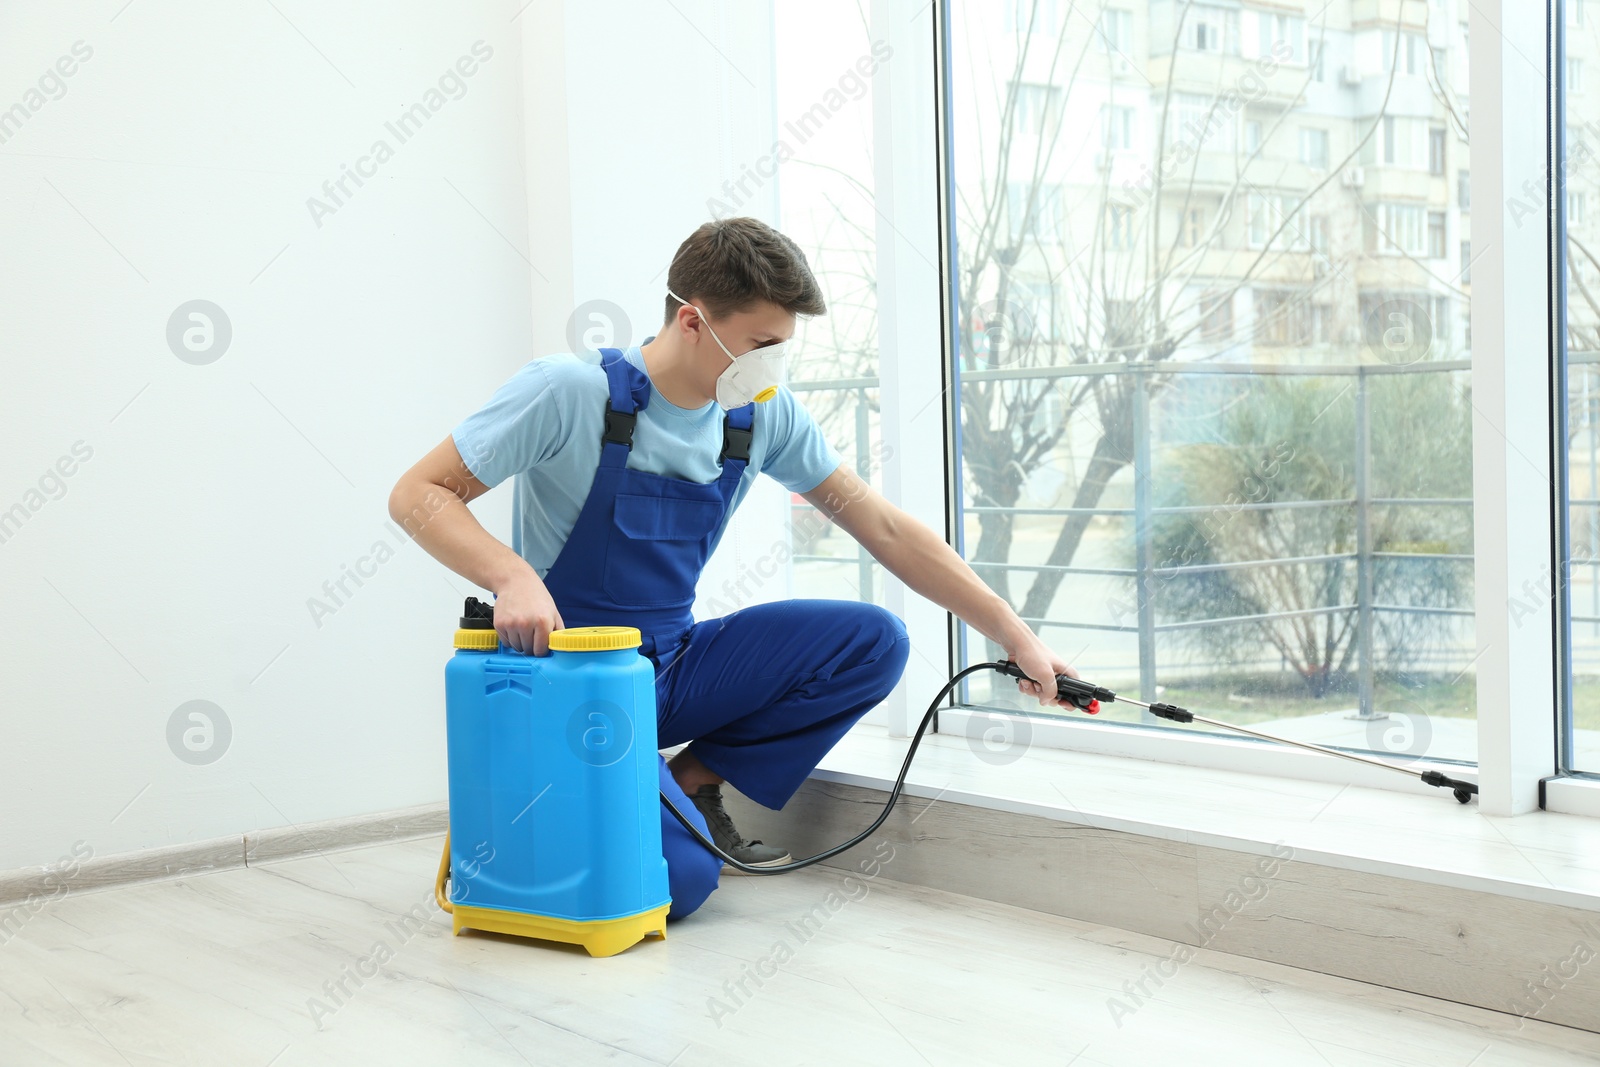 Photo of Pest control worker spraying pesticide near window indoors